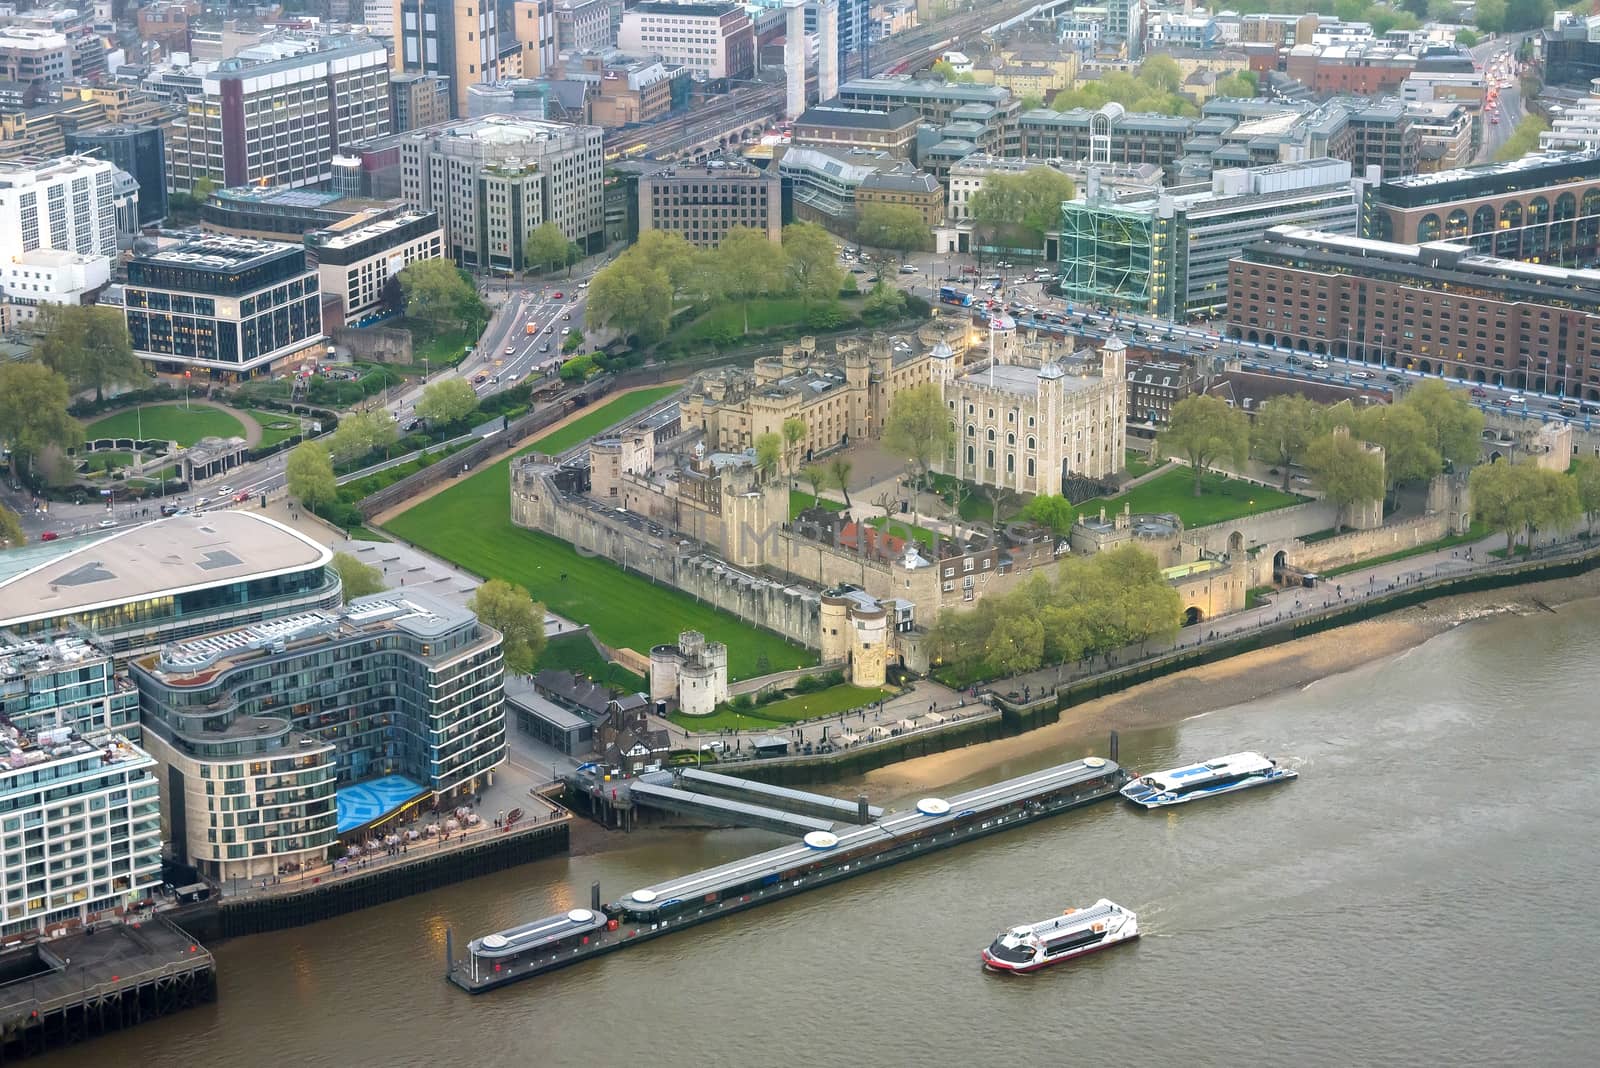 Aerial view of Tower of London by mkos83